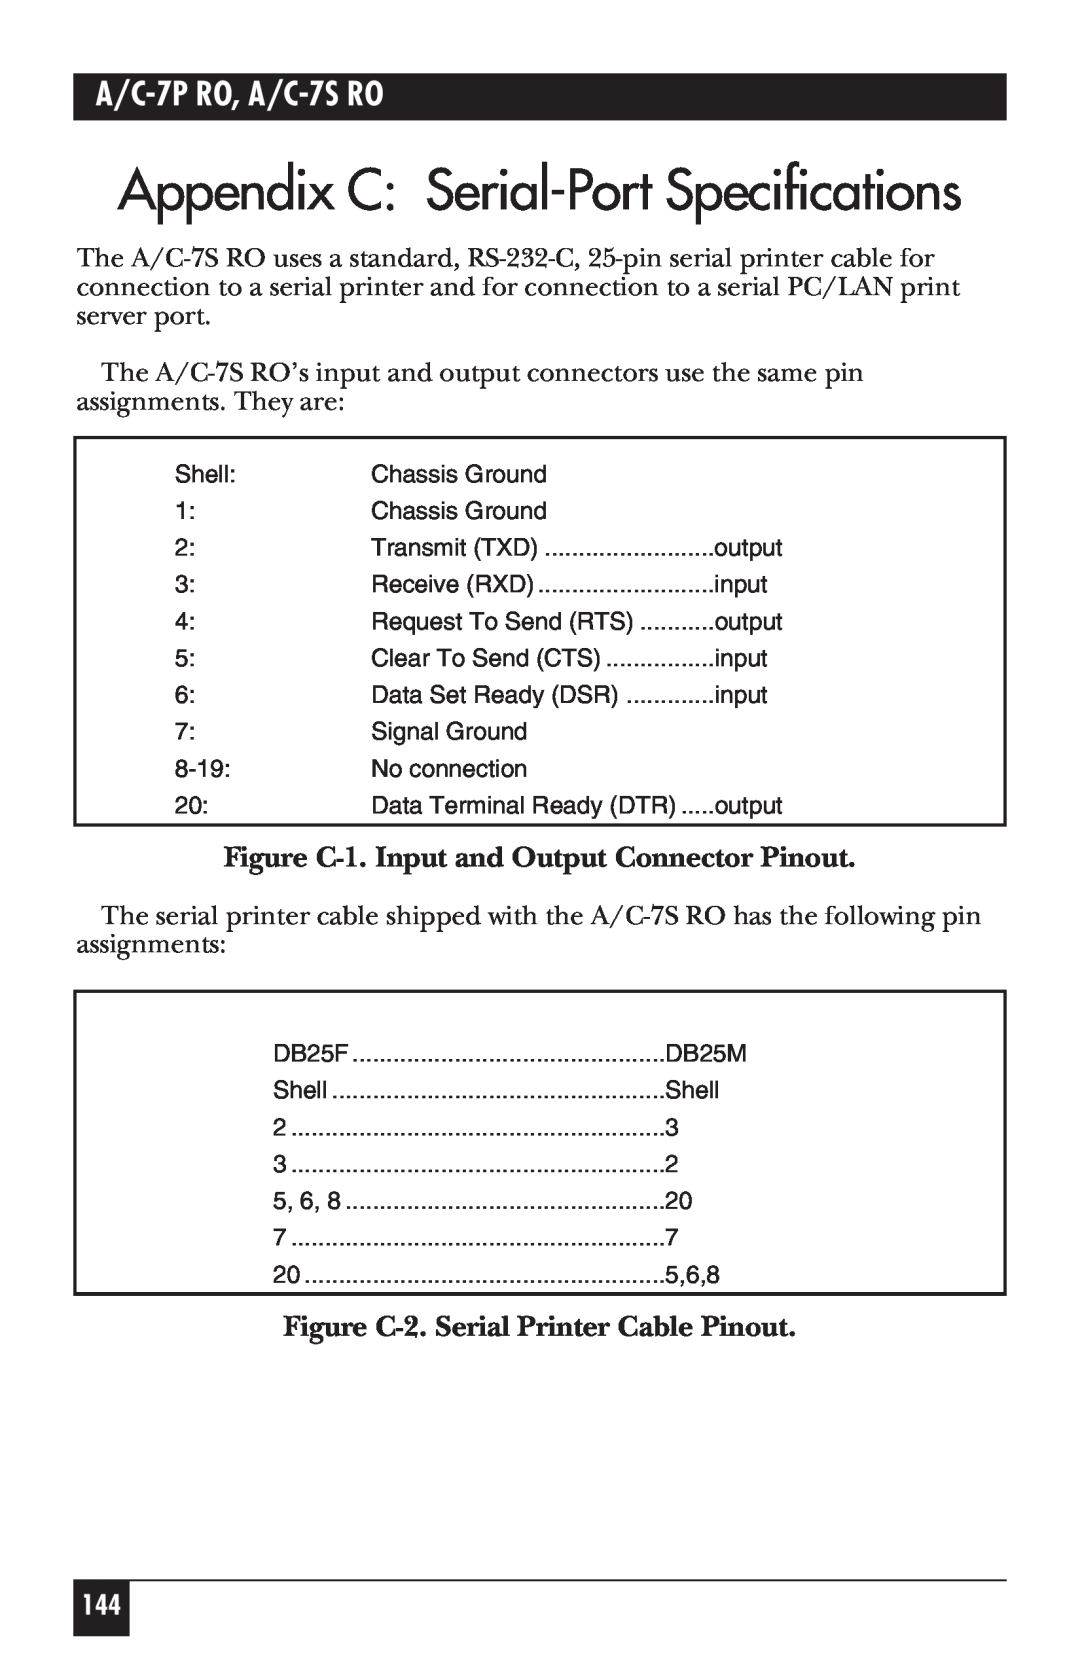 Black Box A/C-7P RO, A/C-7S RO manual Appendix C Serial-Port Specifications, Figure C-1. Input and Output Connector Pinout 